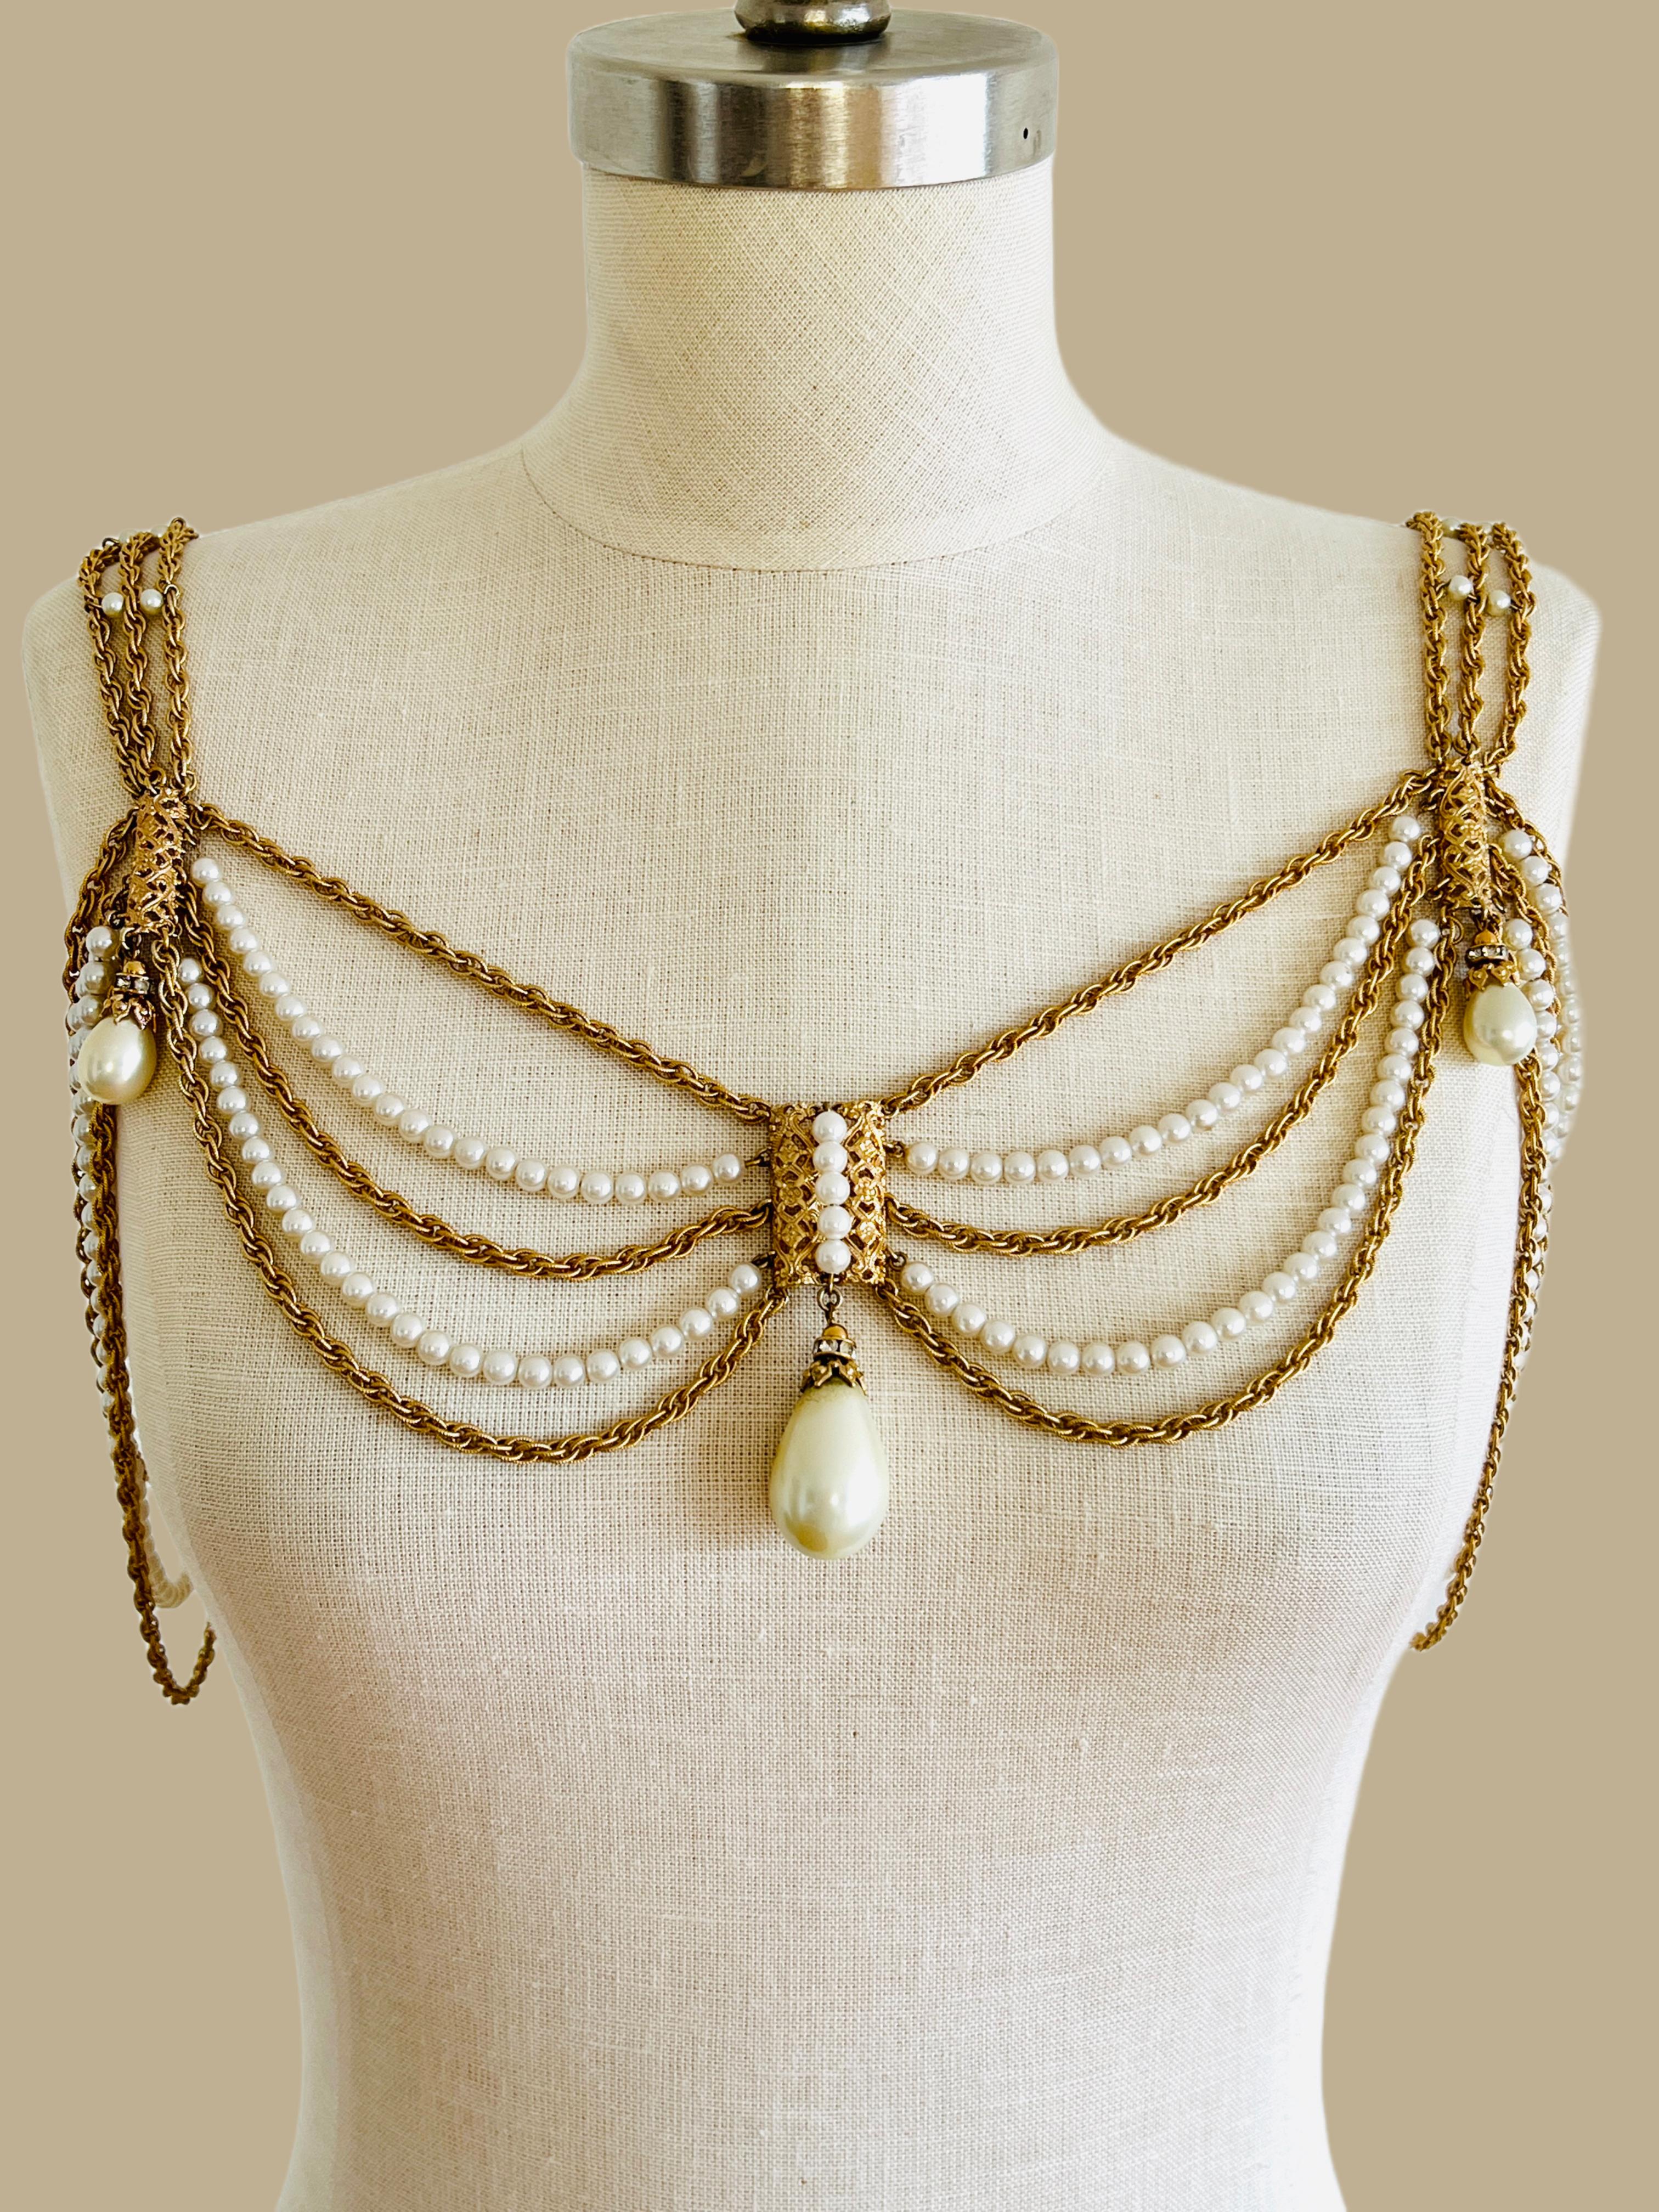 Napier Multi Chain Gold Tiered Layered Shoulder Necklace, Bikini Belt For Sale 4